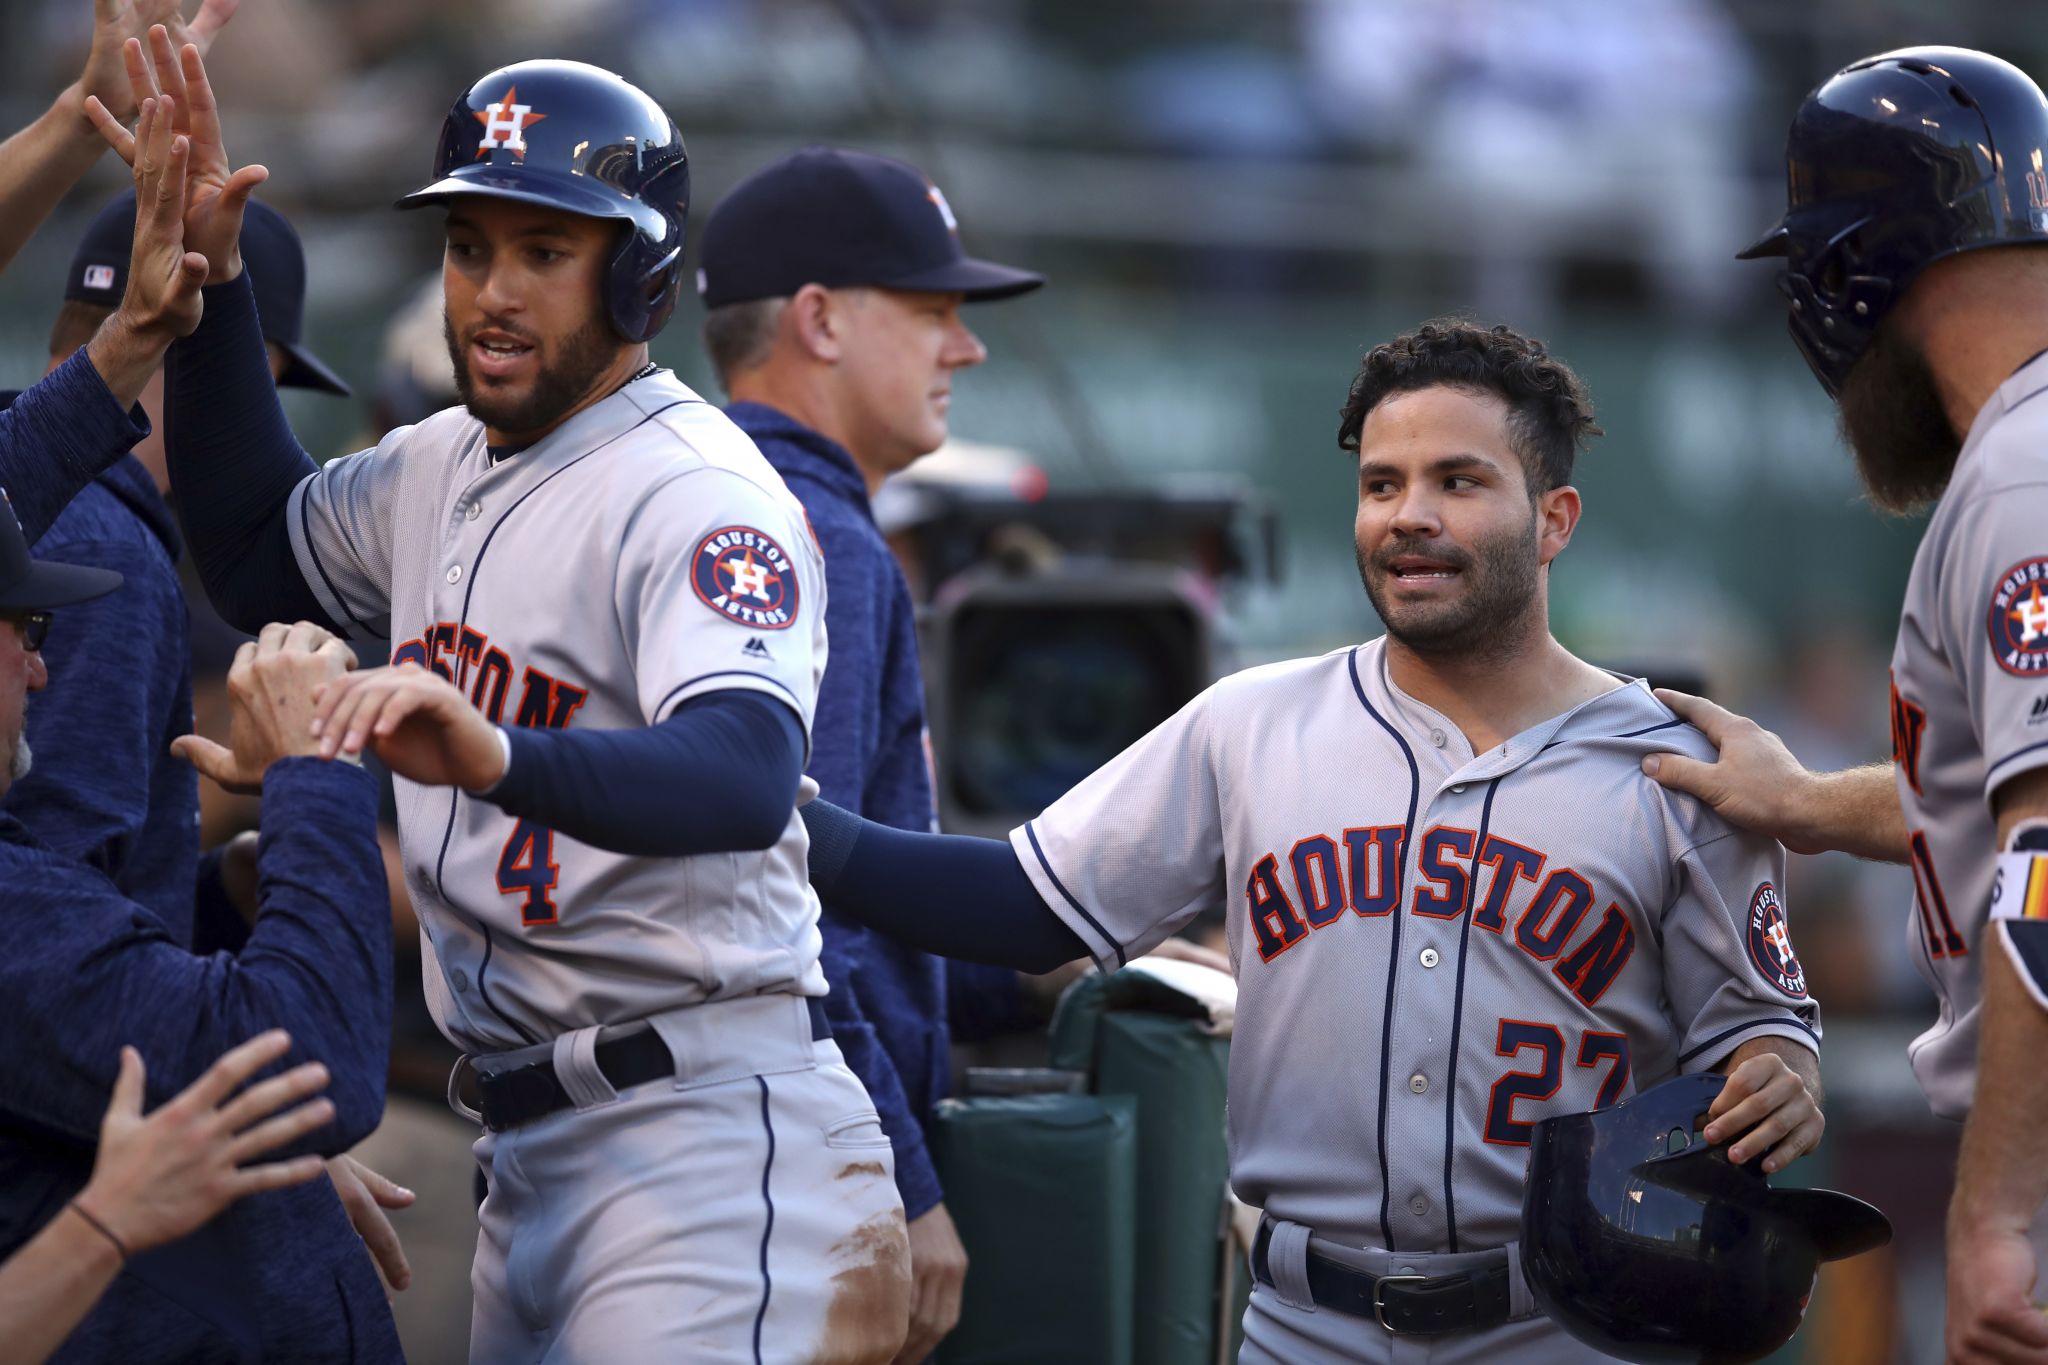 Evan almighty: Gattis goes on another rampage as Astros wallop Athletics